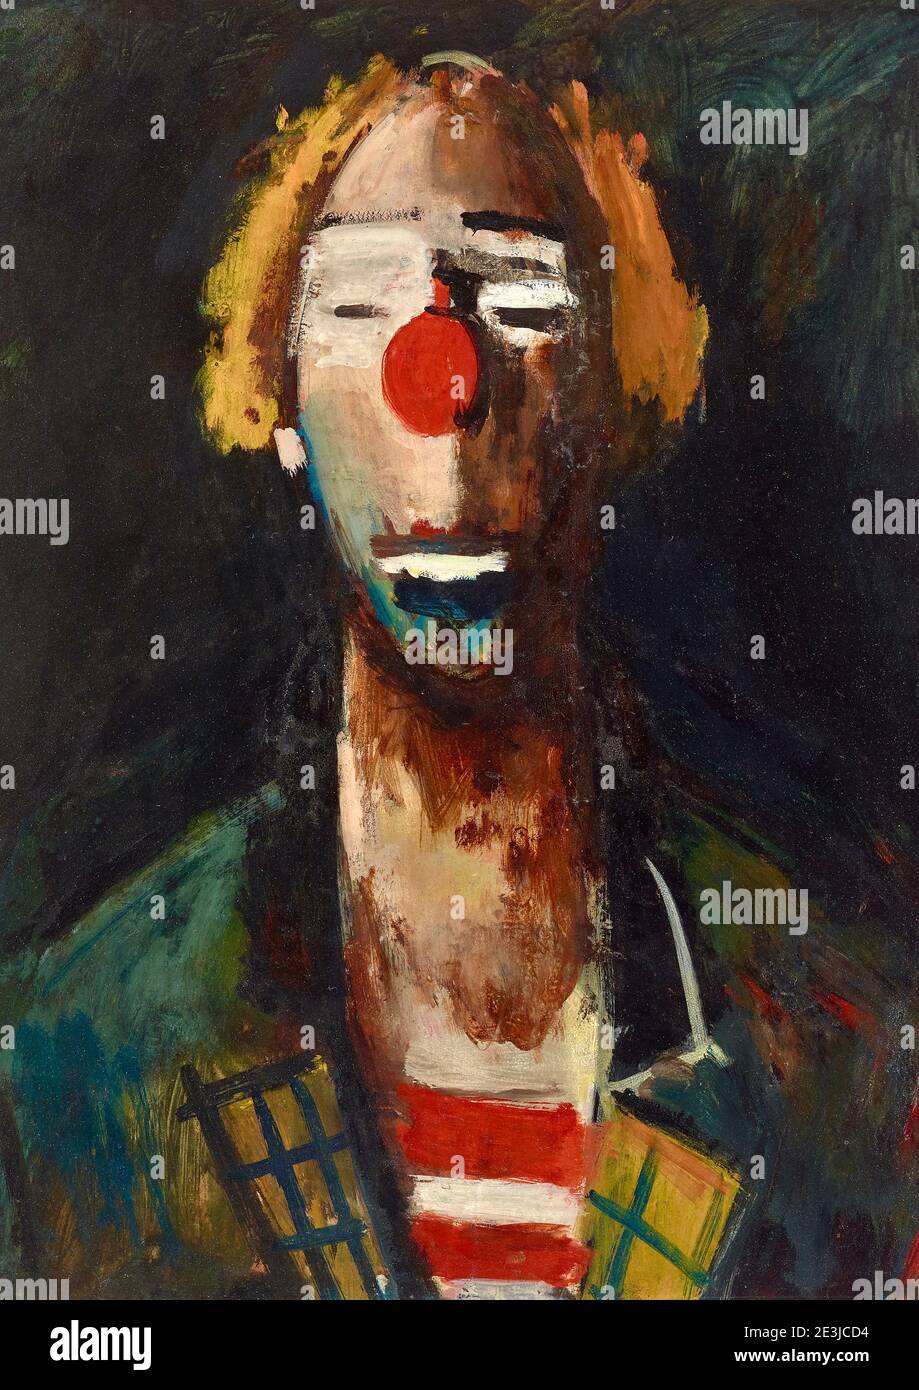 Artwork by Joseph Kutter entitled Tete de Clown or Head of Clown from1937. The clown is in costume with a prominent red nose. Stock Photo